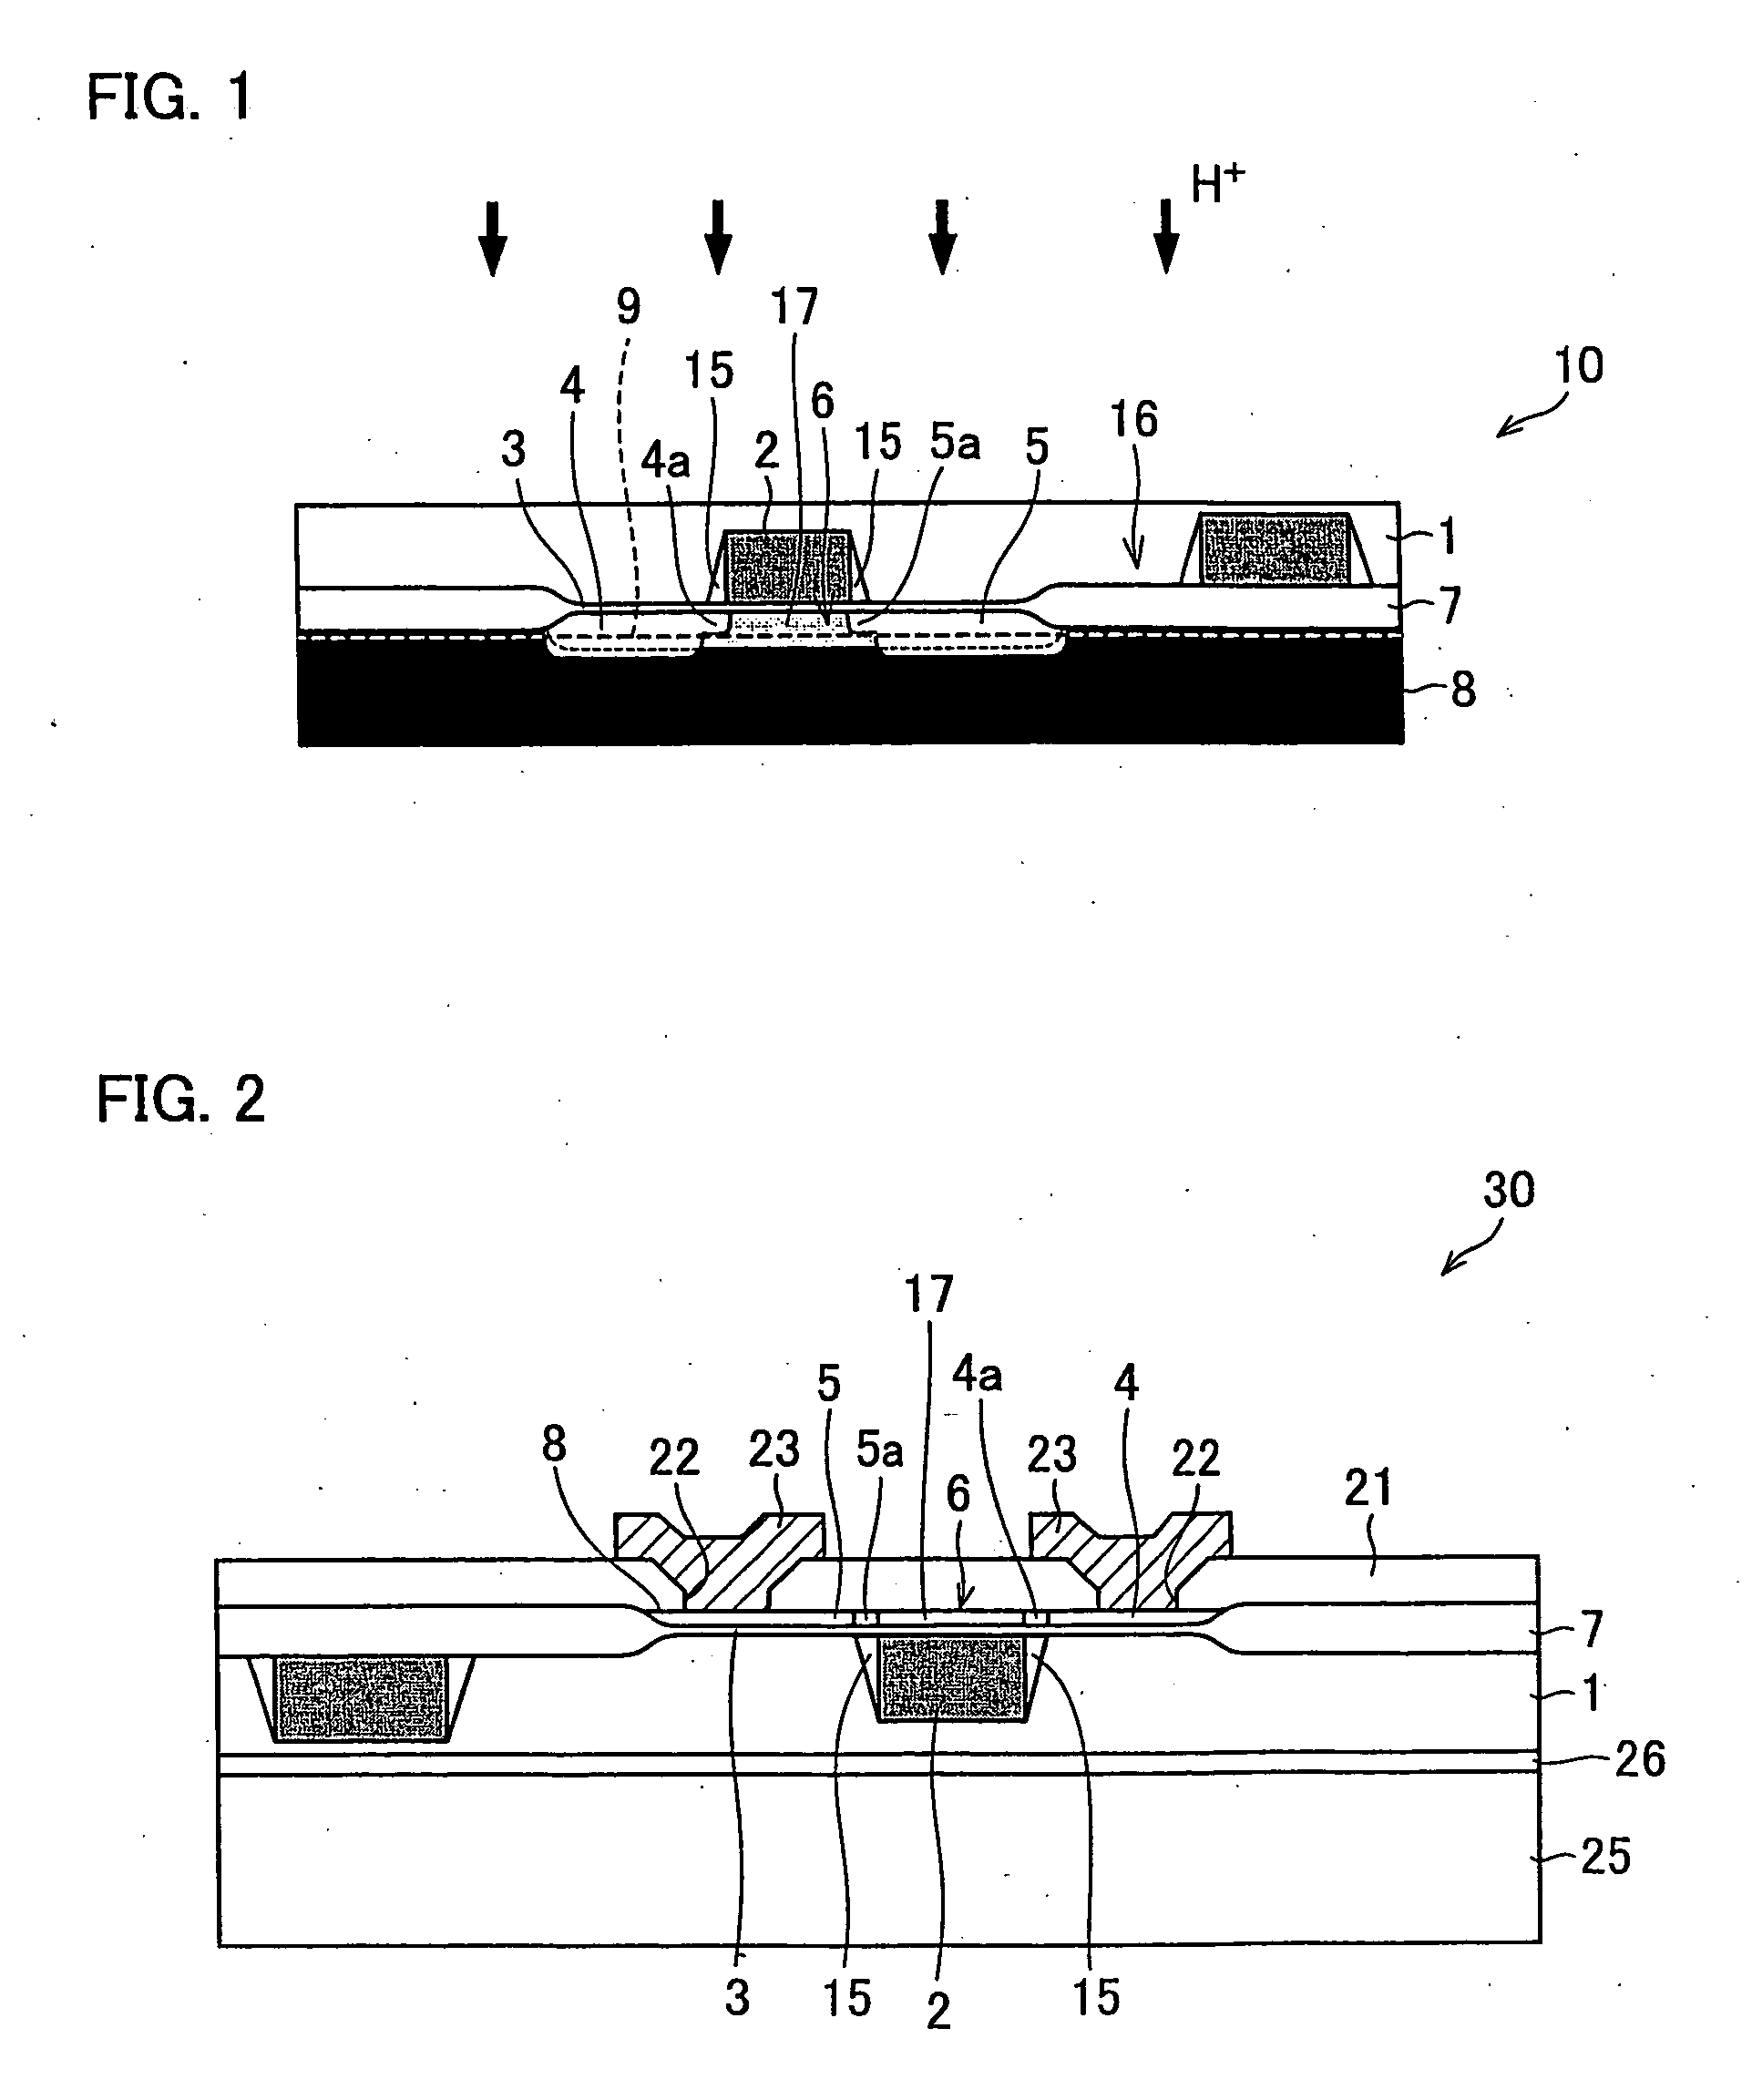 Semiconductor substrate, semiconductor device, and manufacturing methods for them